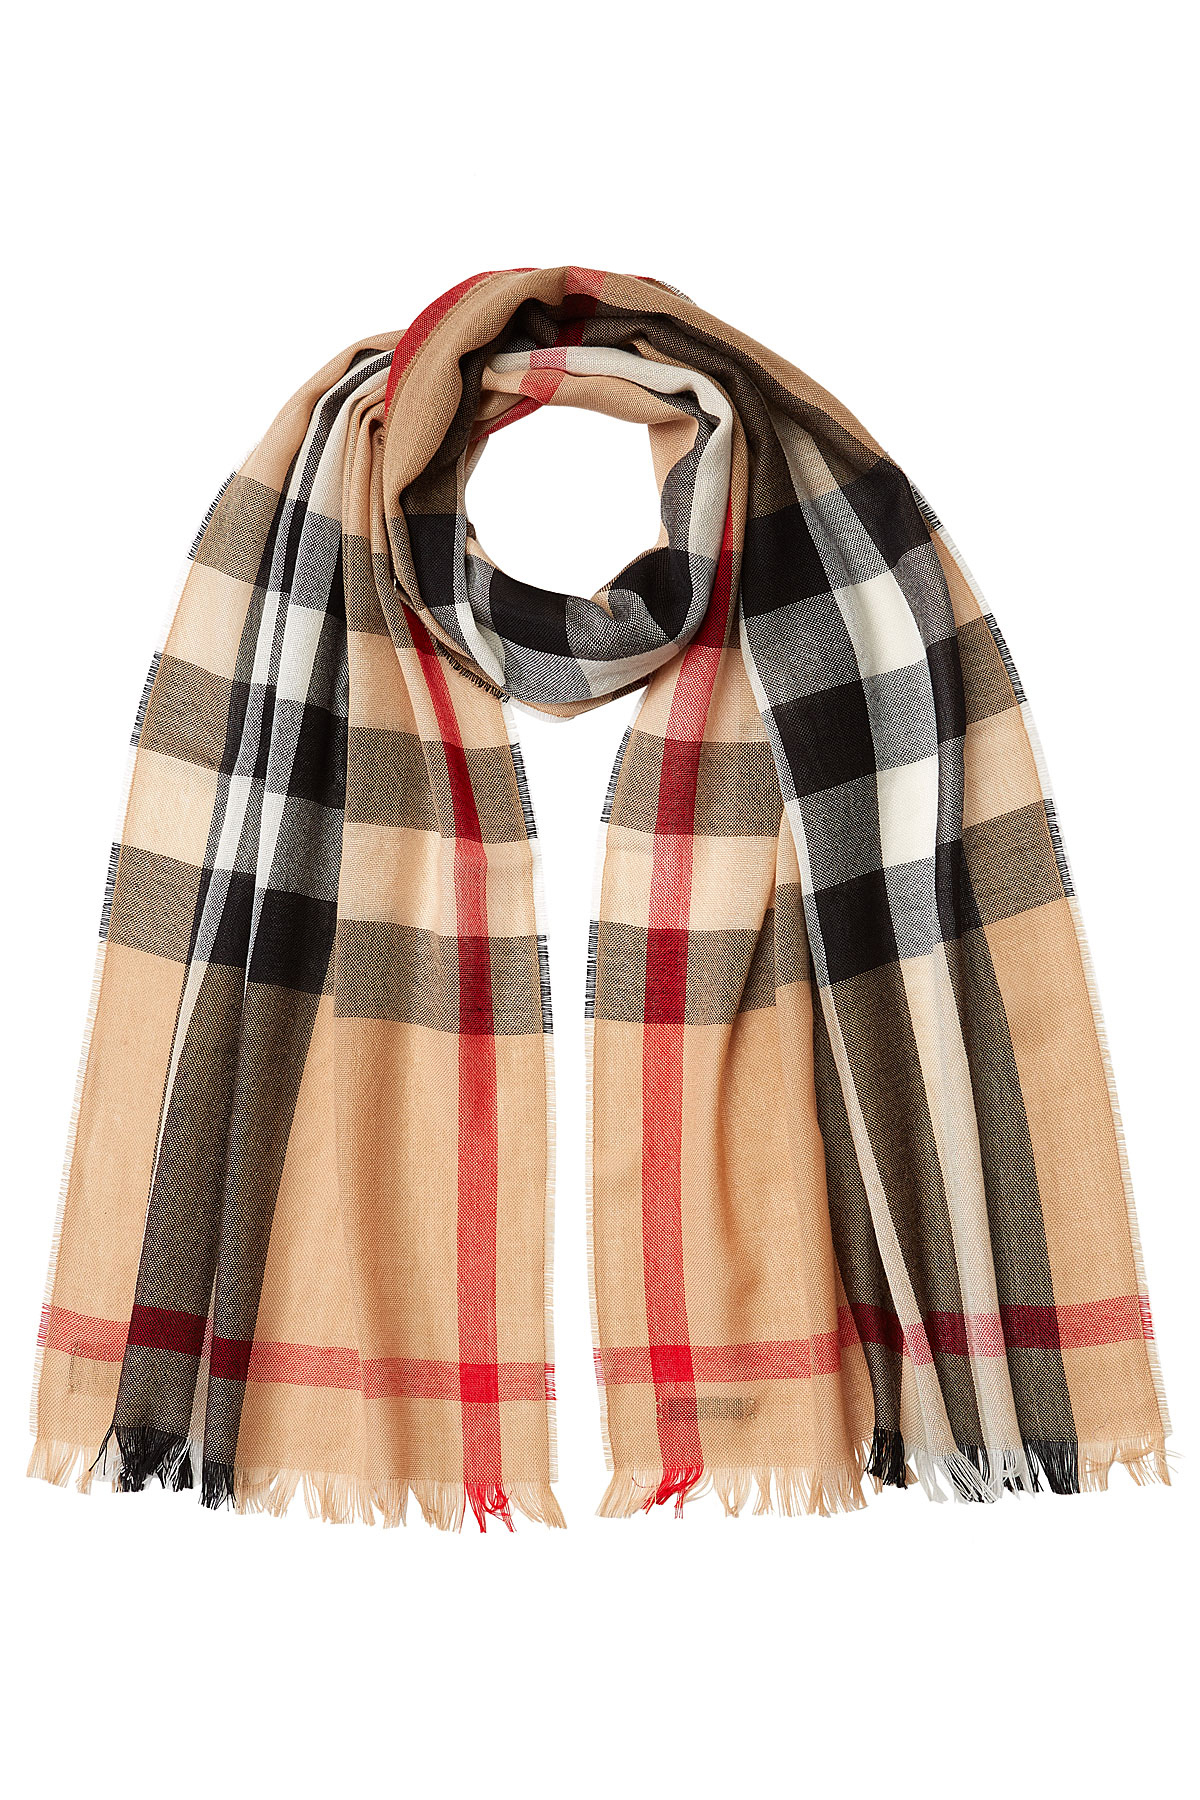 Burberry Wool-cashmere Check Print Scarf - Camel in Beige for Men | Lyst